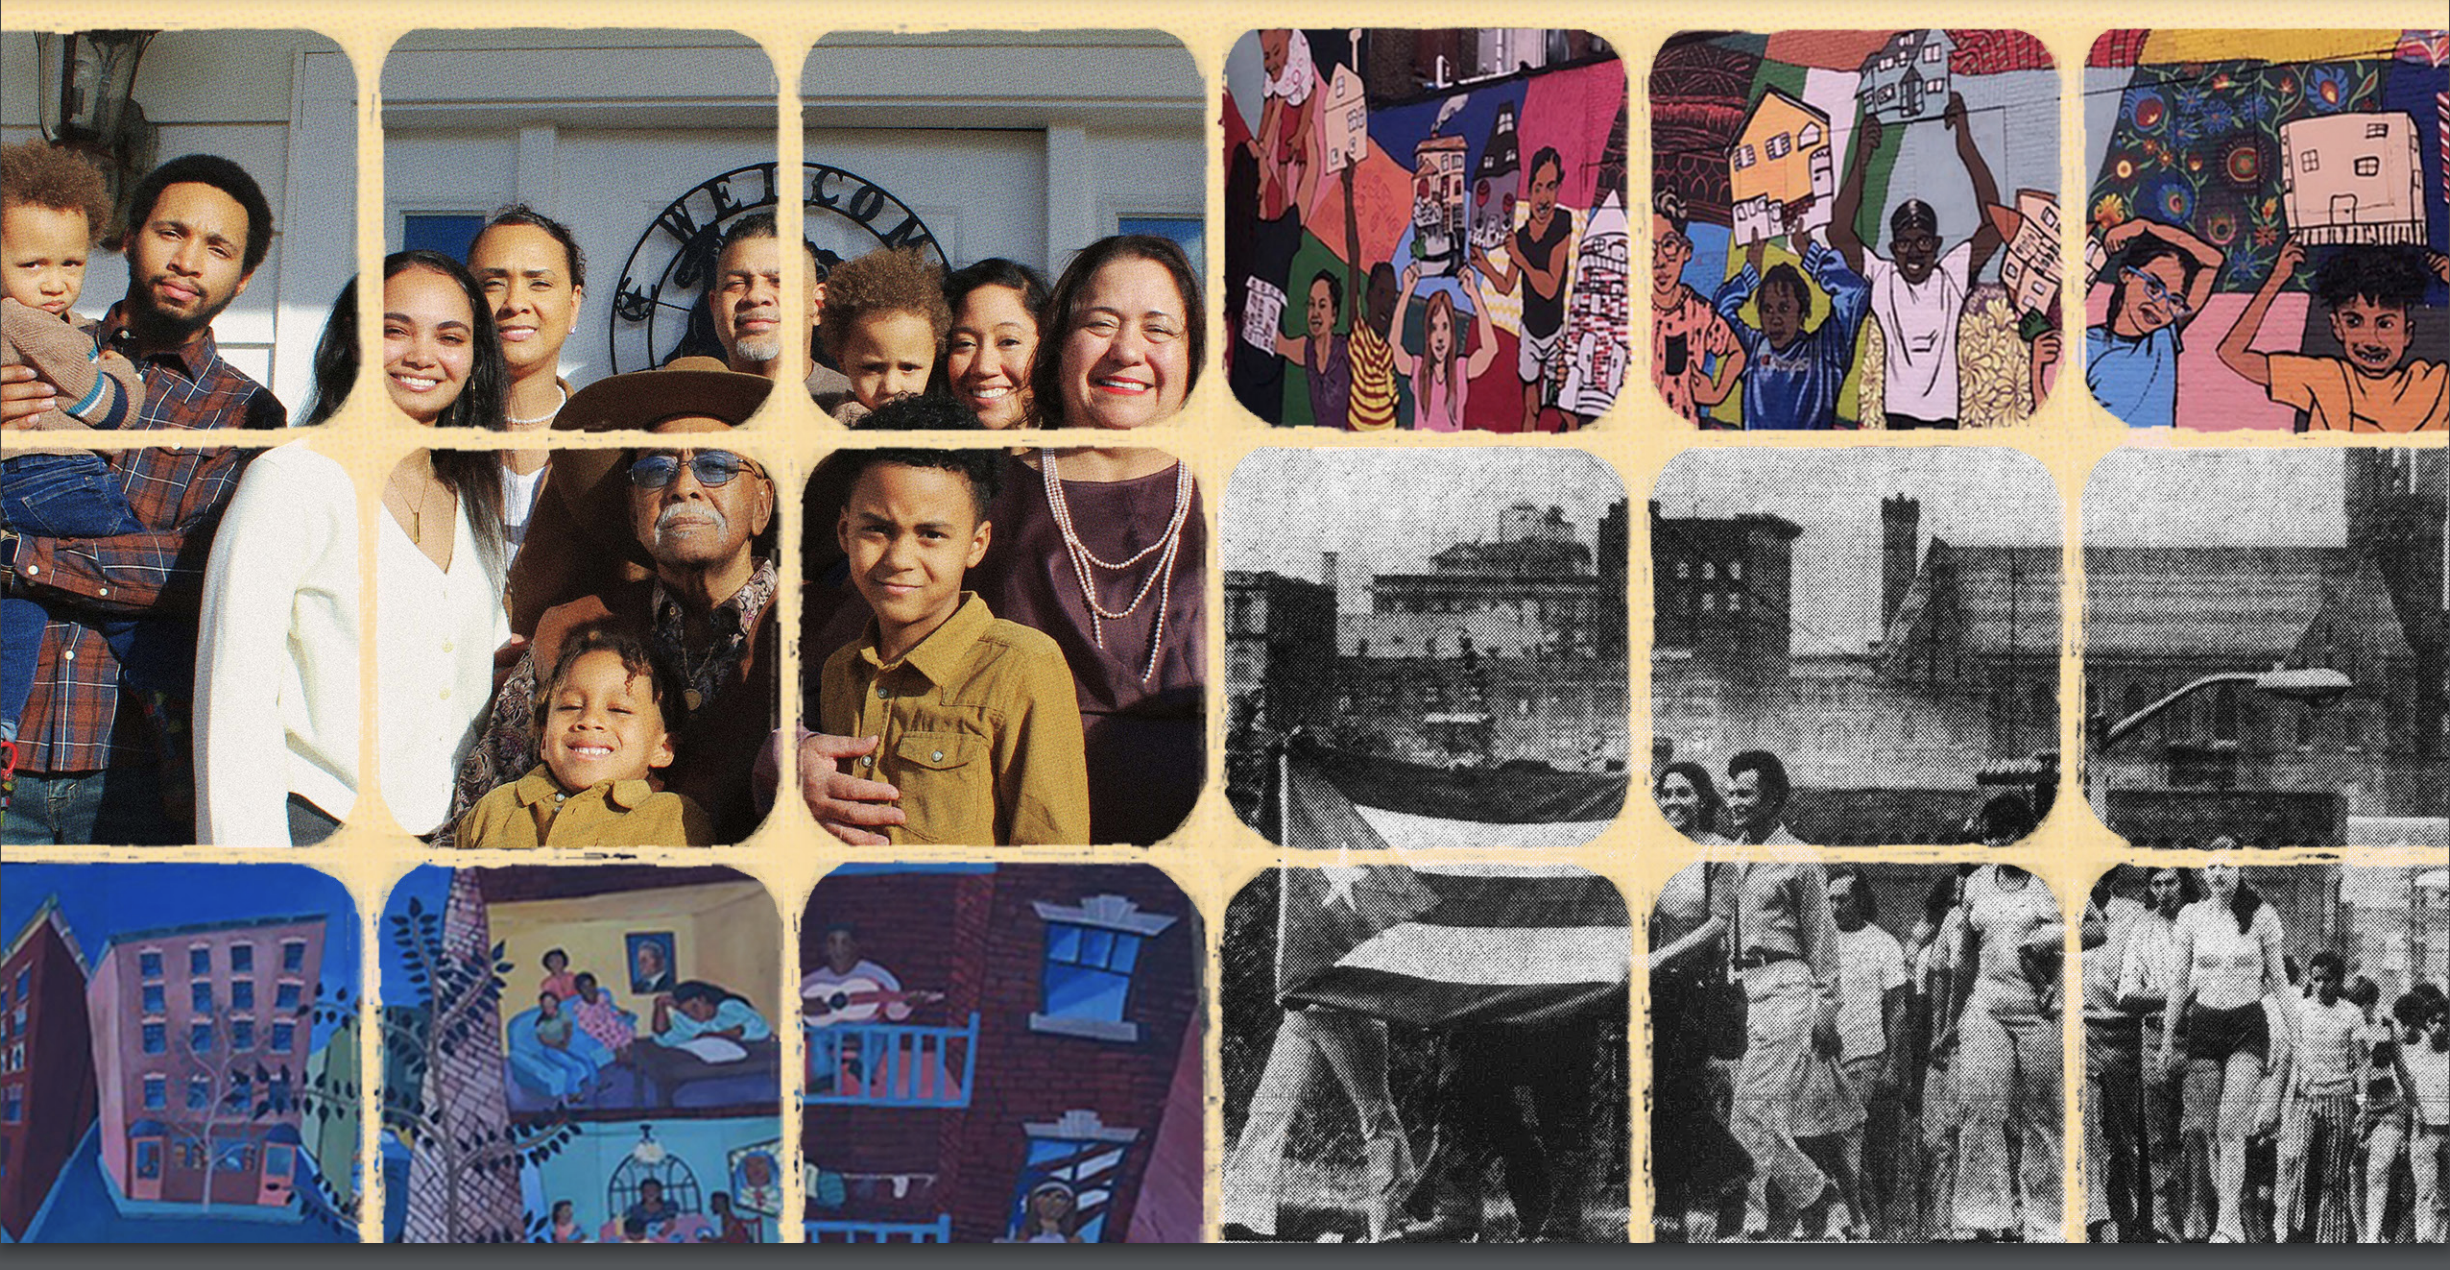 A collage of four scenes, each depicting Latino communities